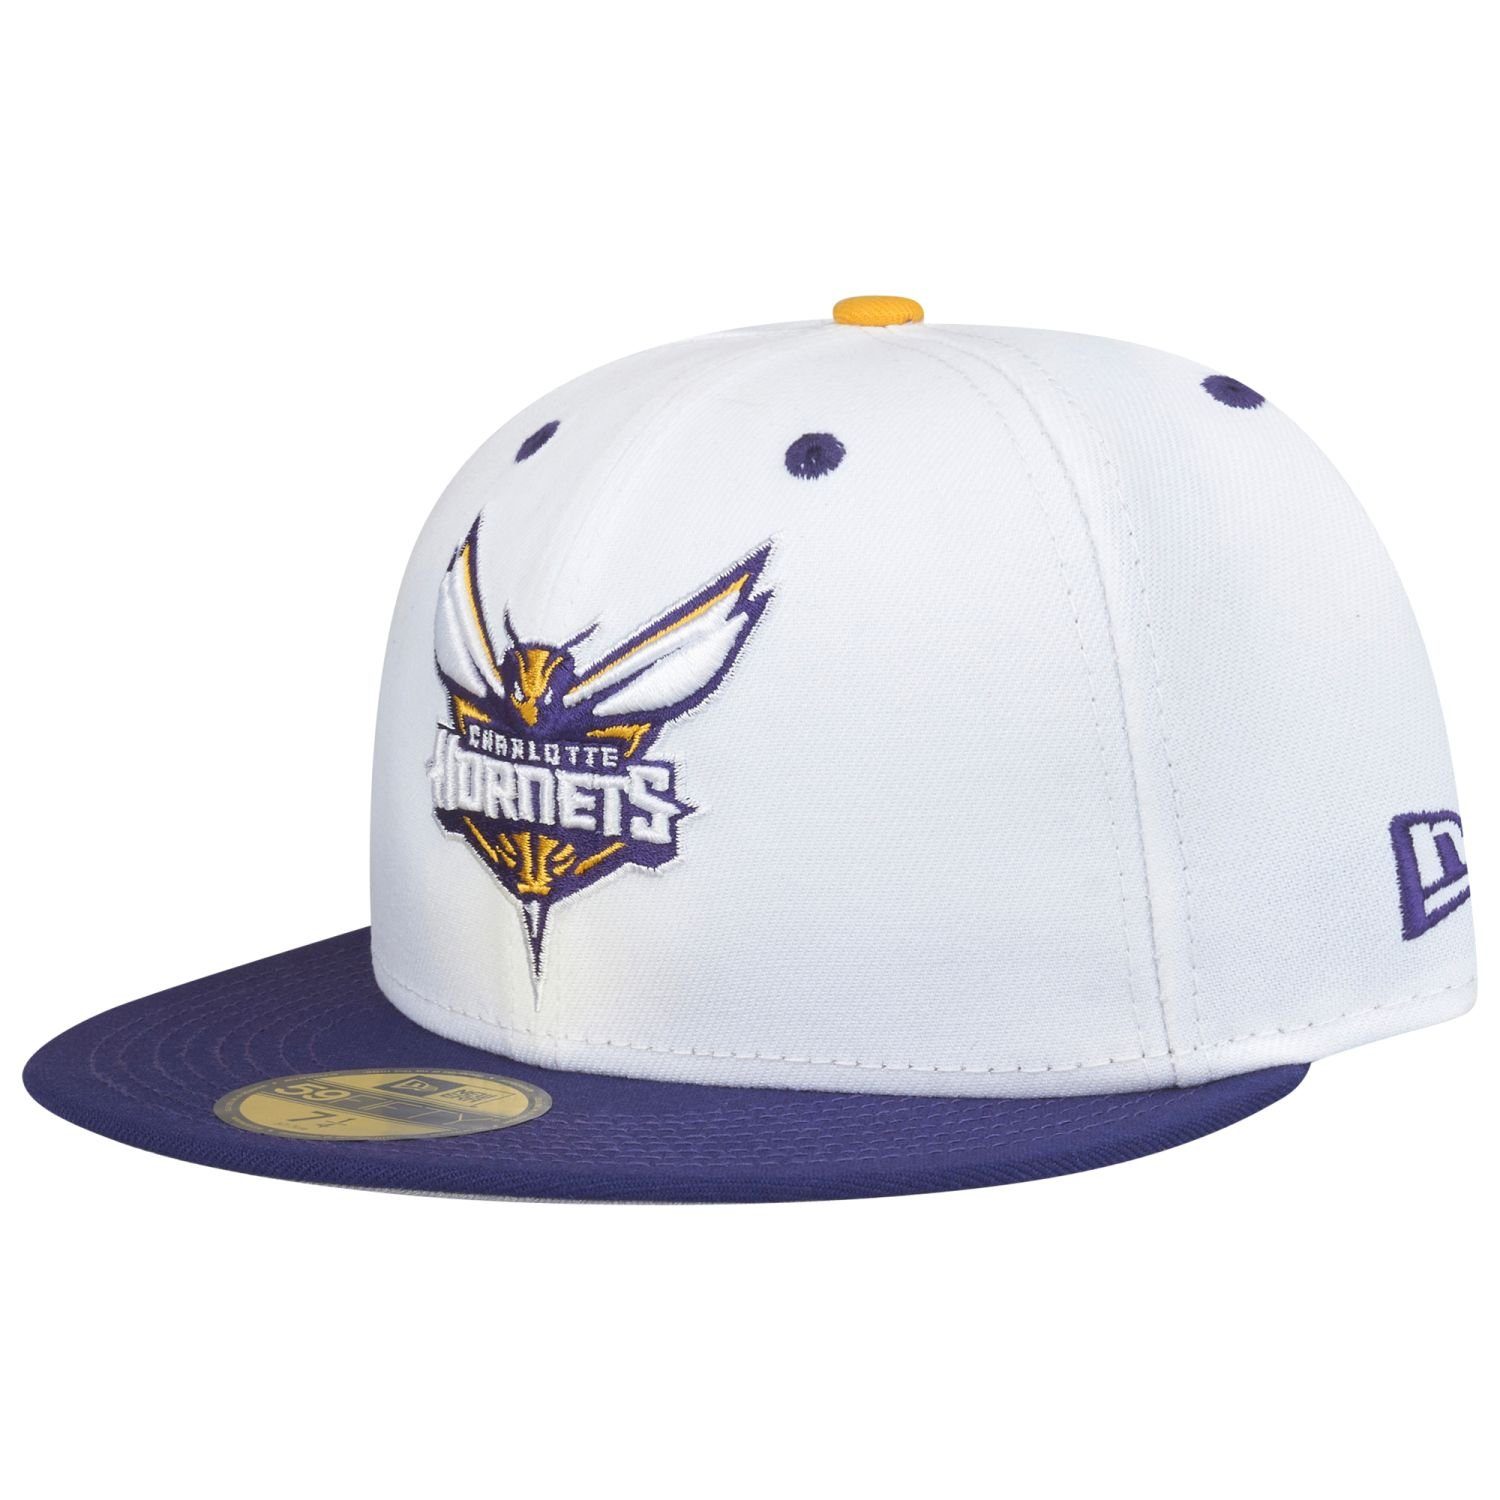 New Era Fitted Cap 59Fifty NBA Charlotte Hornets | Fitted Caps